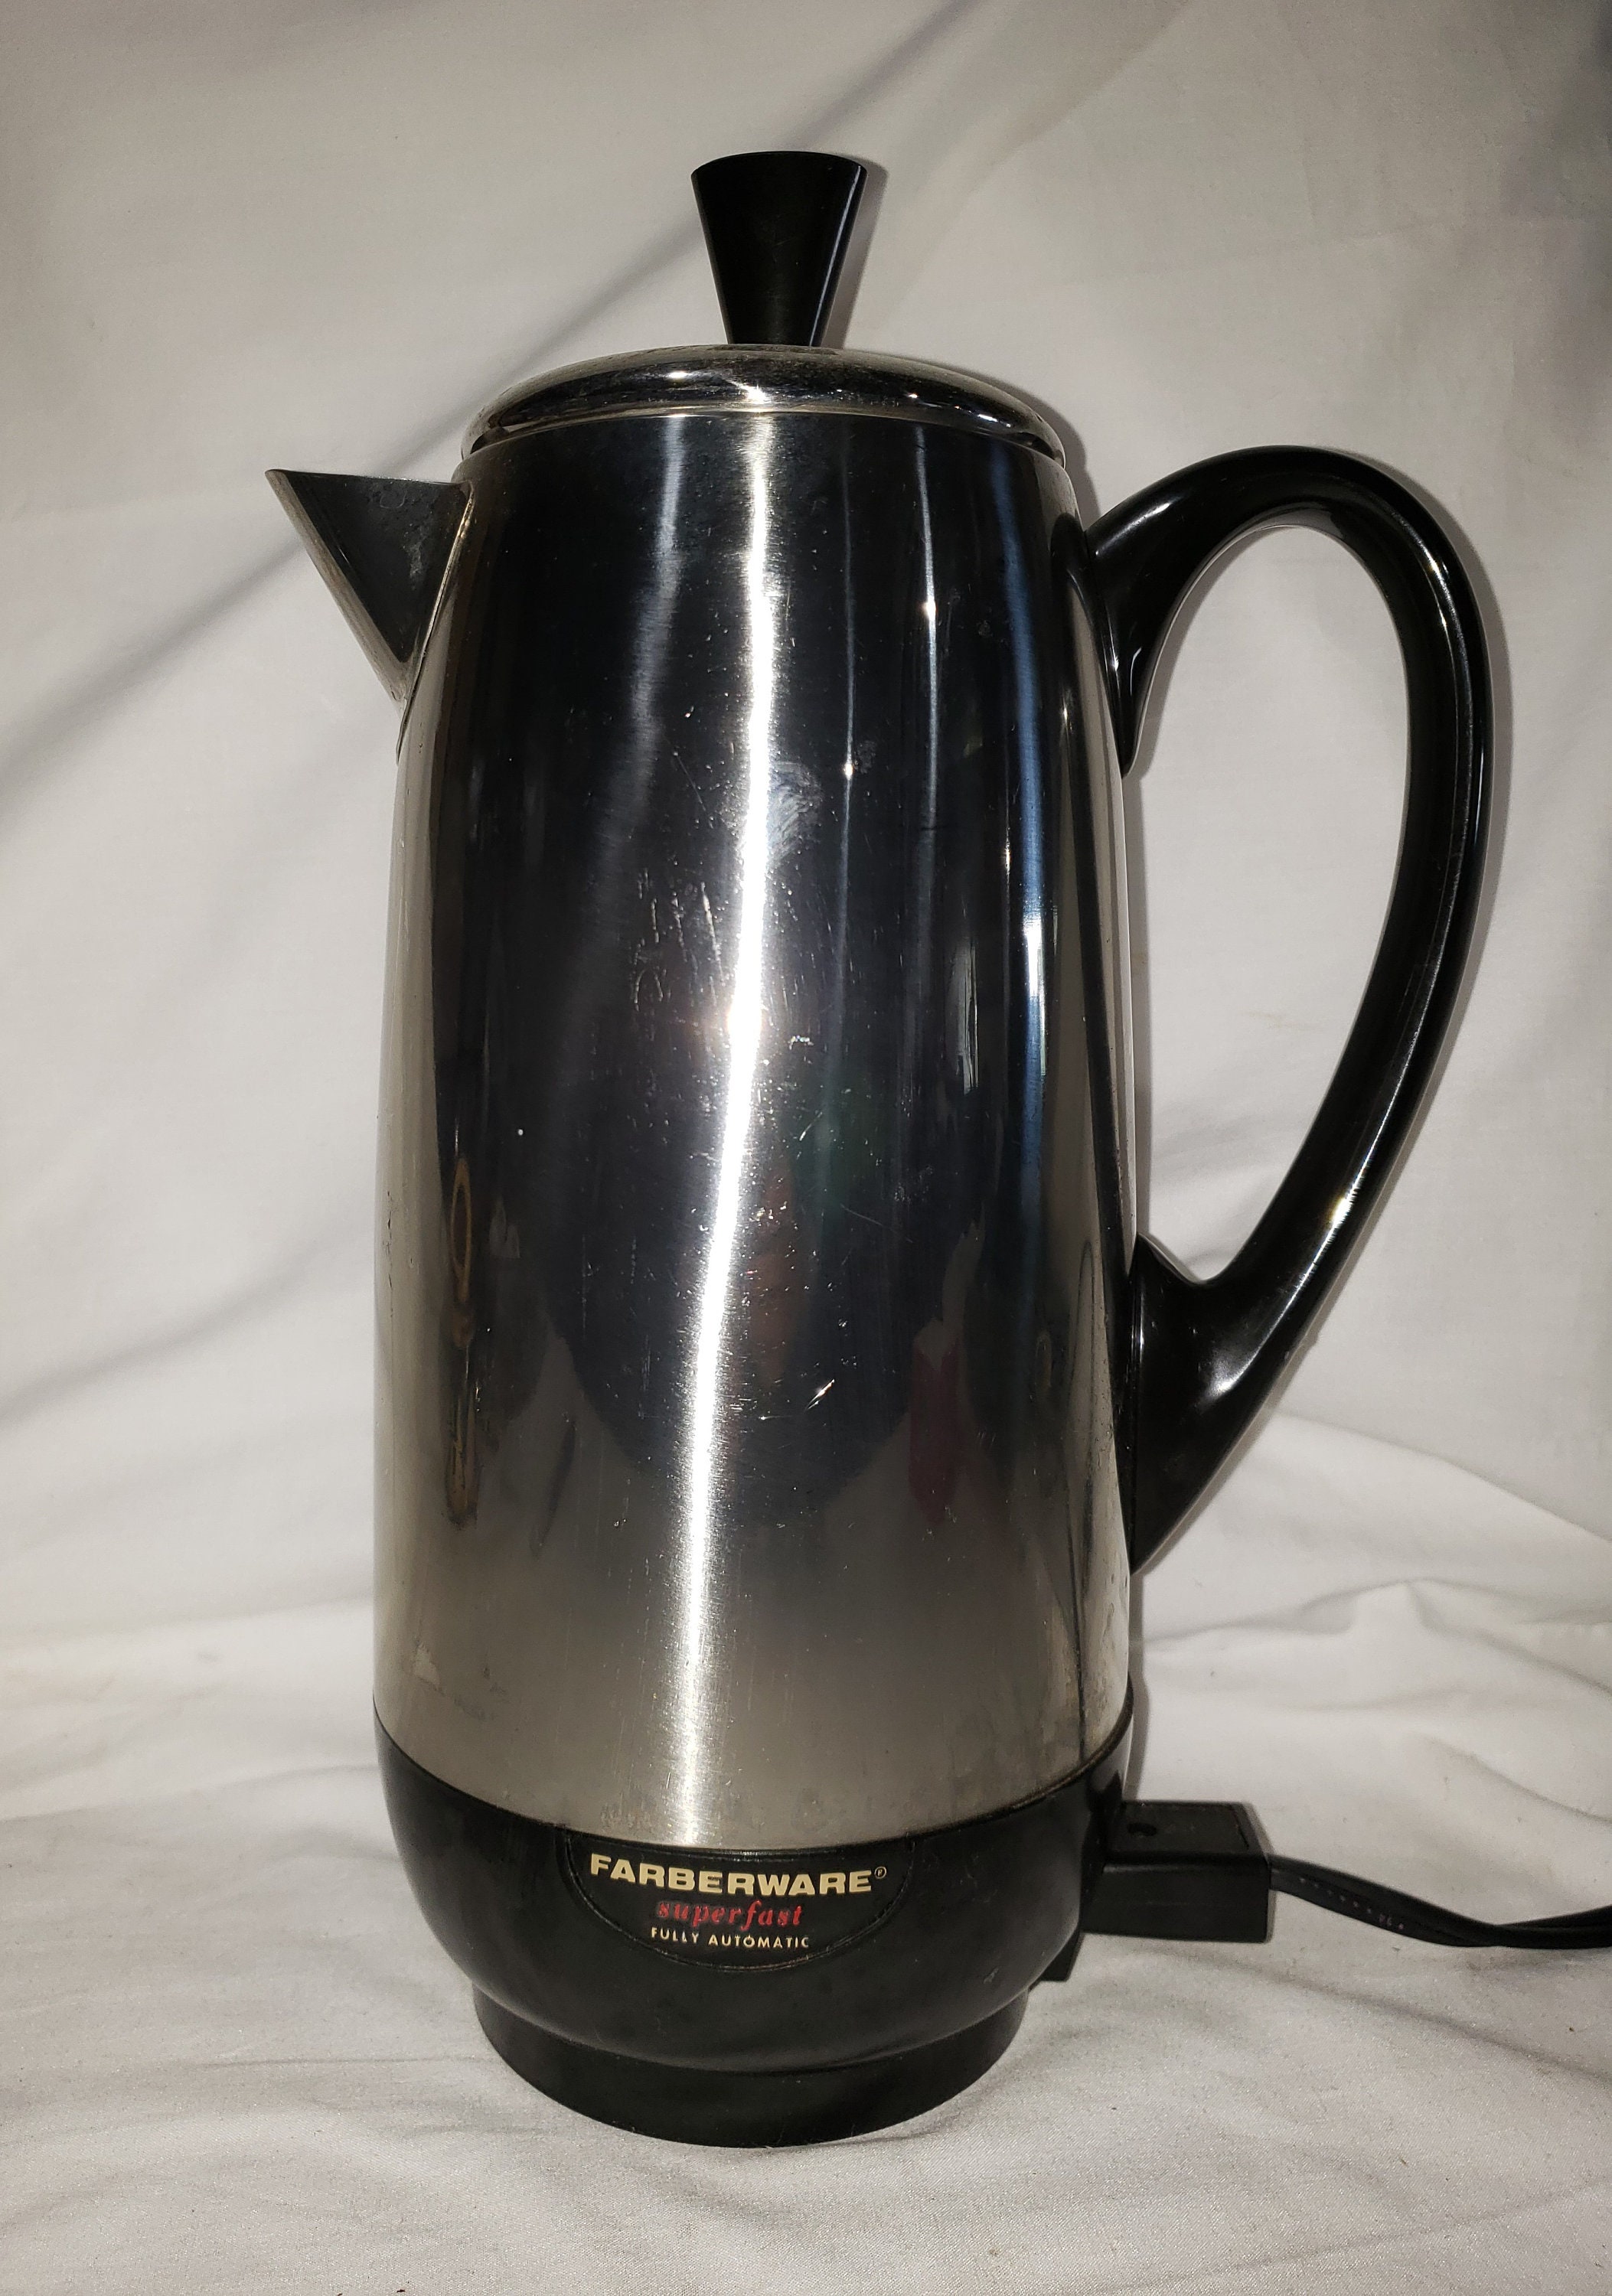 Farberware Superfast Percolator Replacement Parts: Electric Cord, Knob,  Basket, Handle, Lid, Spreader, or Lid 138 B 8 Cup 142B 12 Cup Coffee -   Denmark